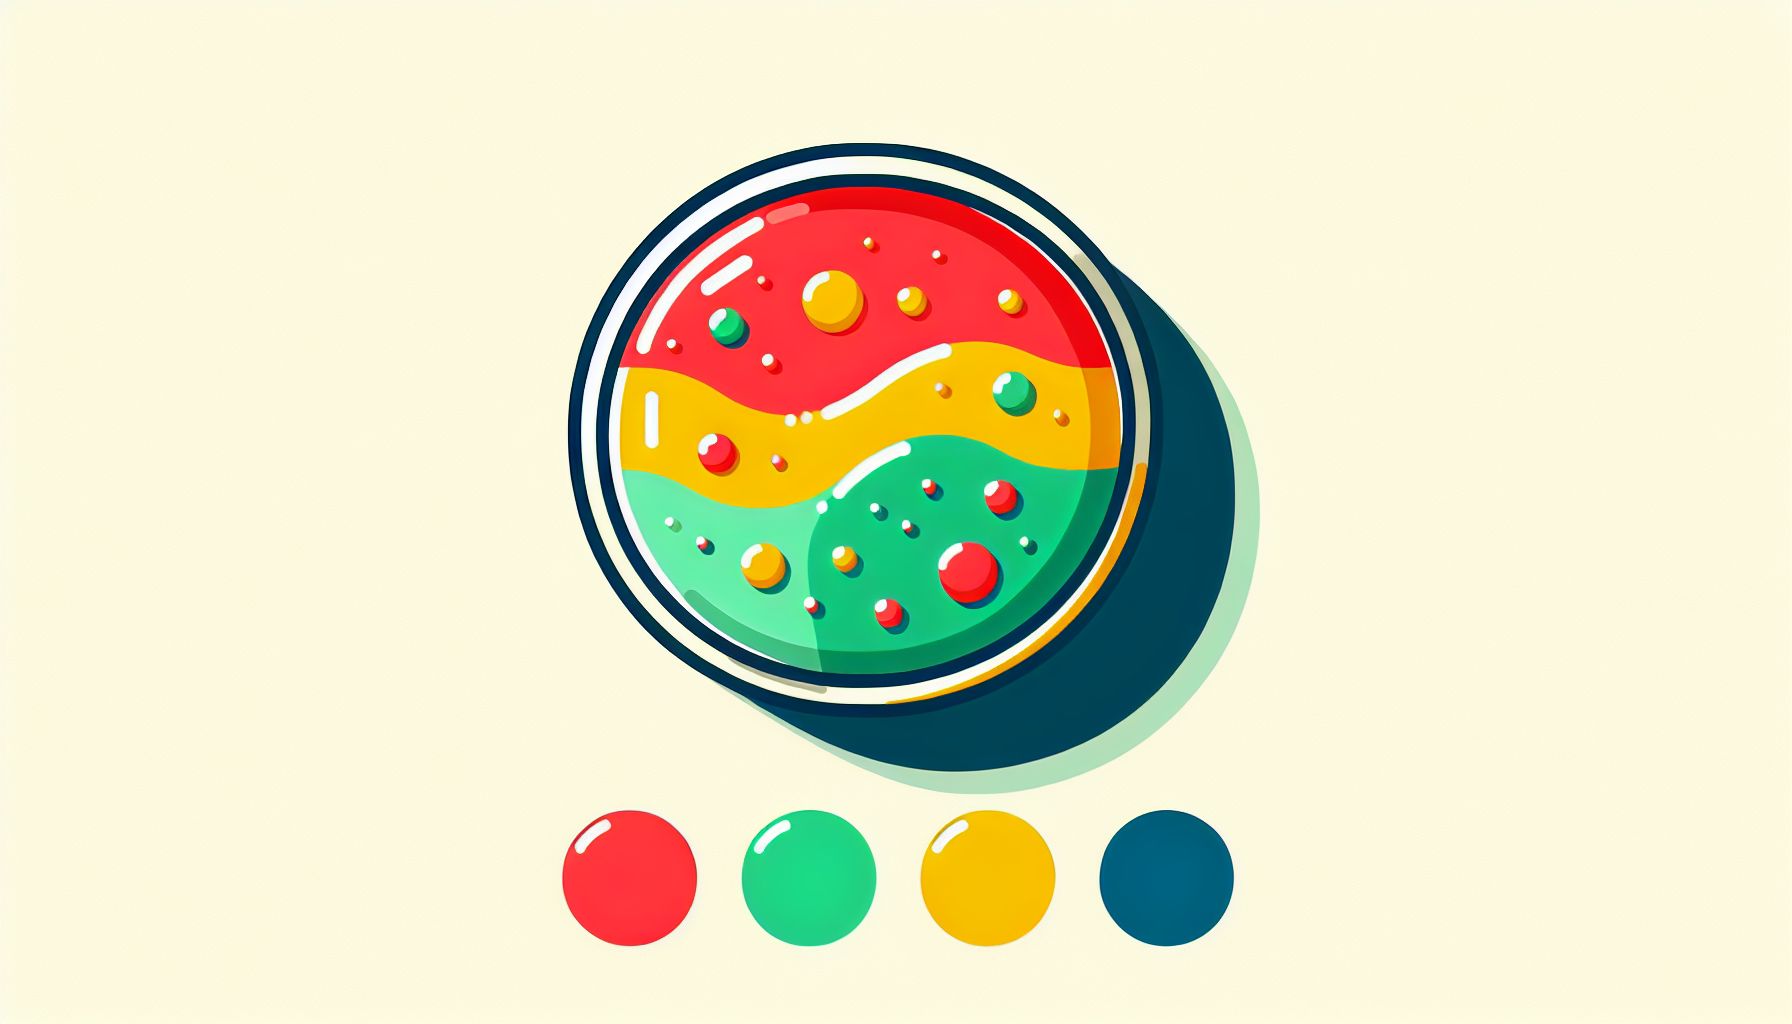 Petri Dish in flat illustration style and white background, red #f47574, green #88c7a8, yellow #fcc44b, and blue #645bc8 colors.